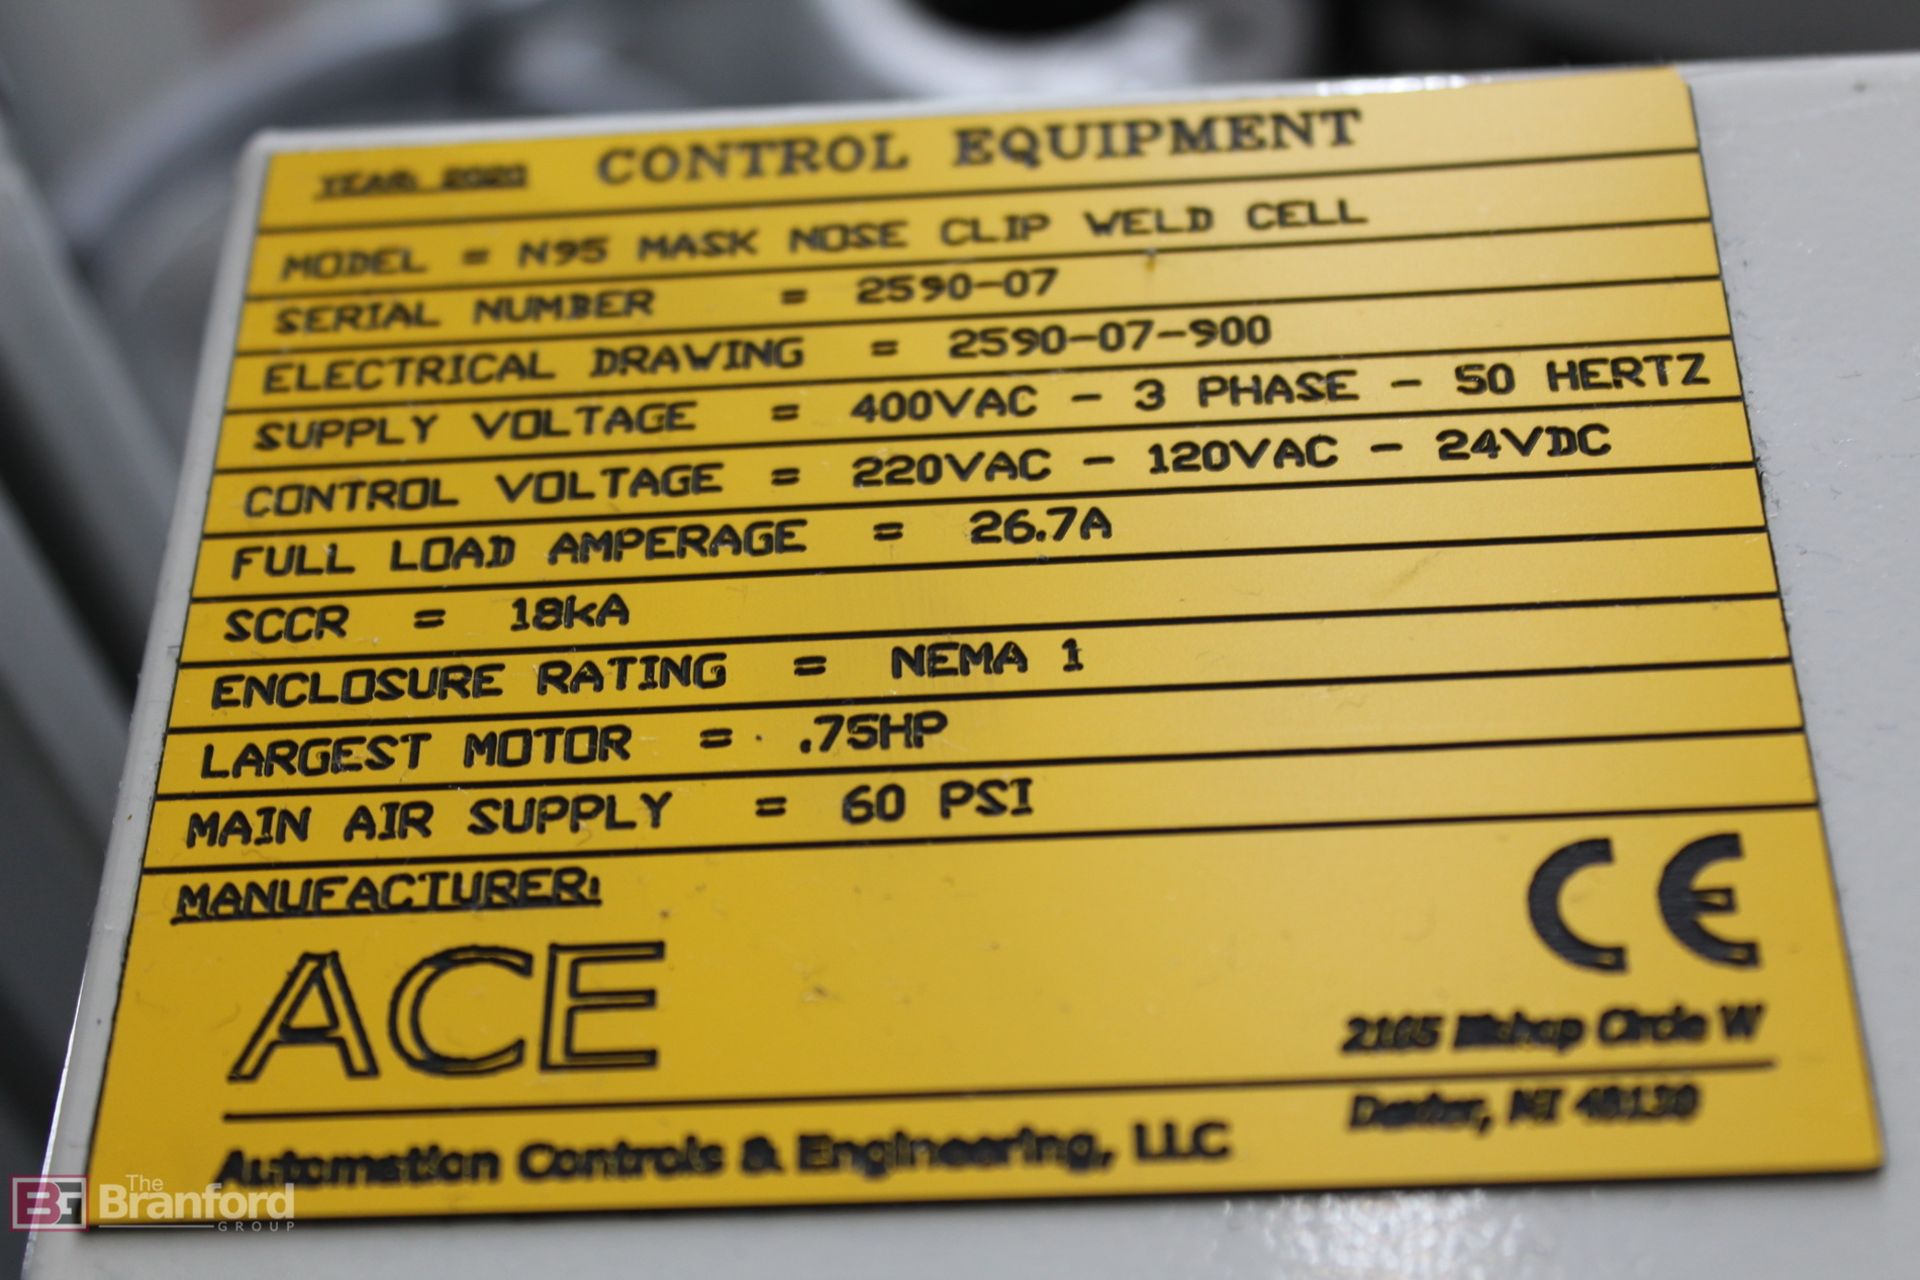 ACE N95 Mask Nose Clip Weld Cell - Image 6 of 7